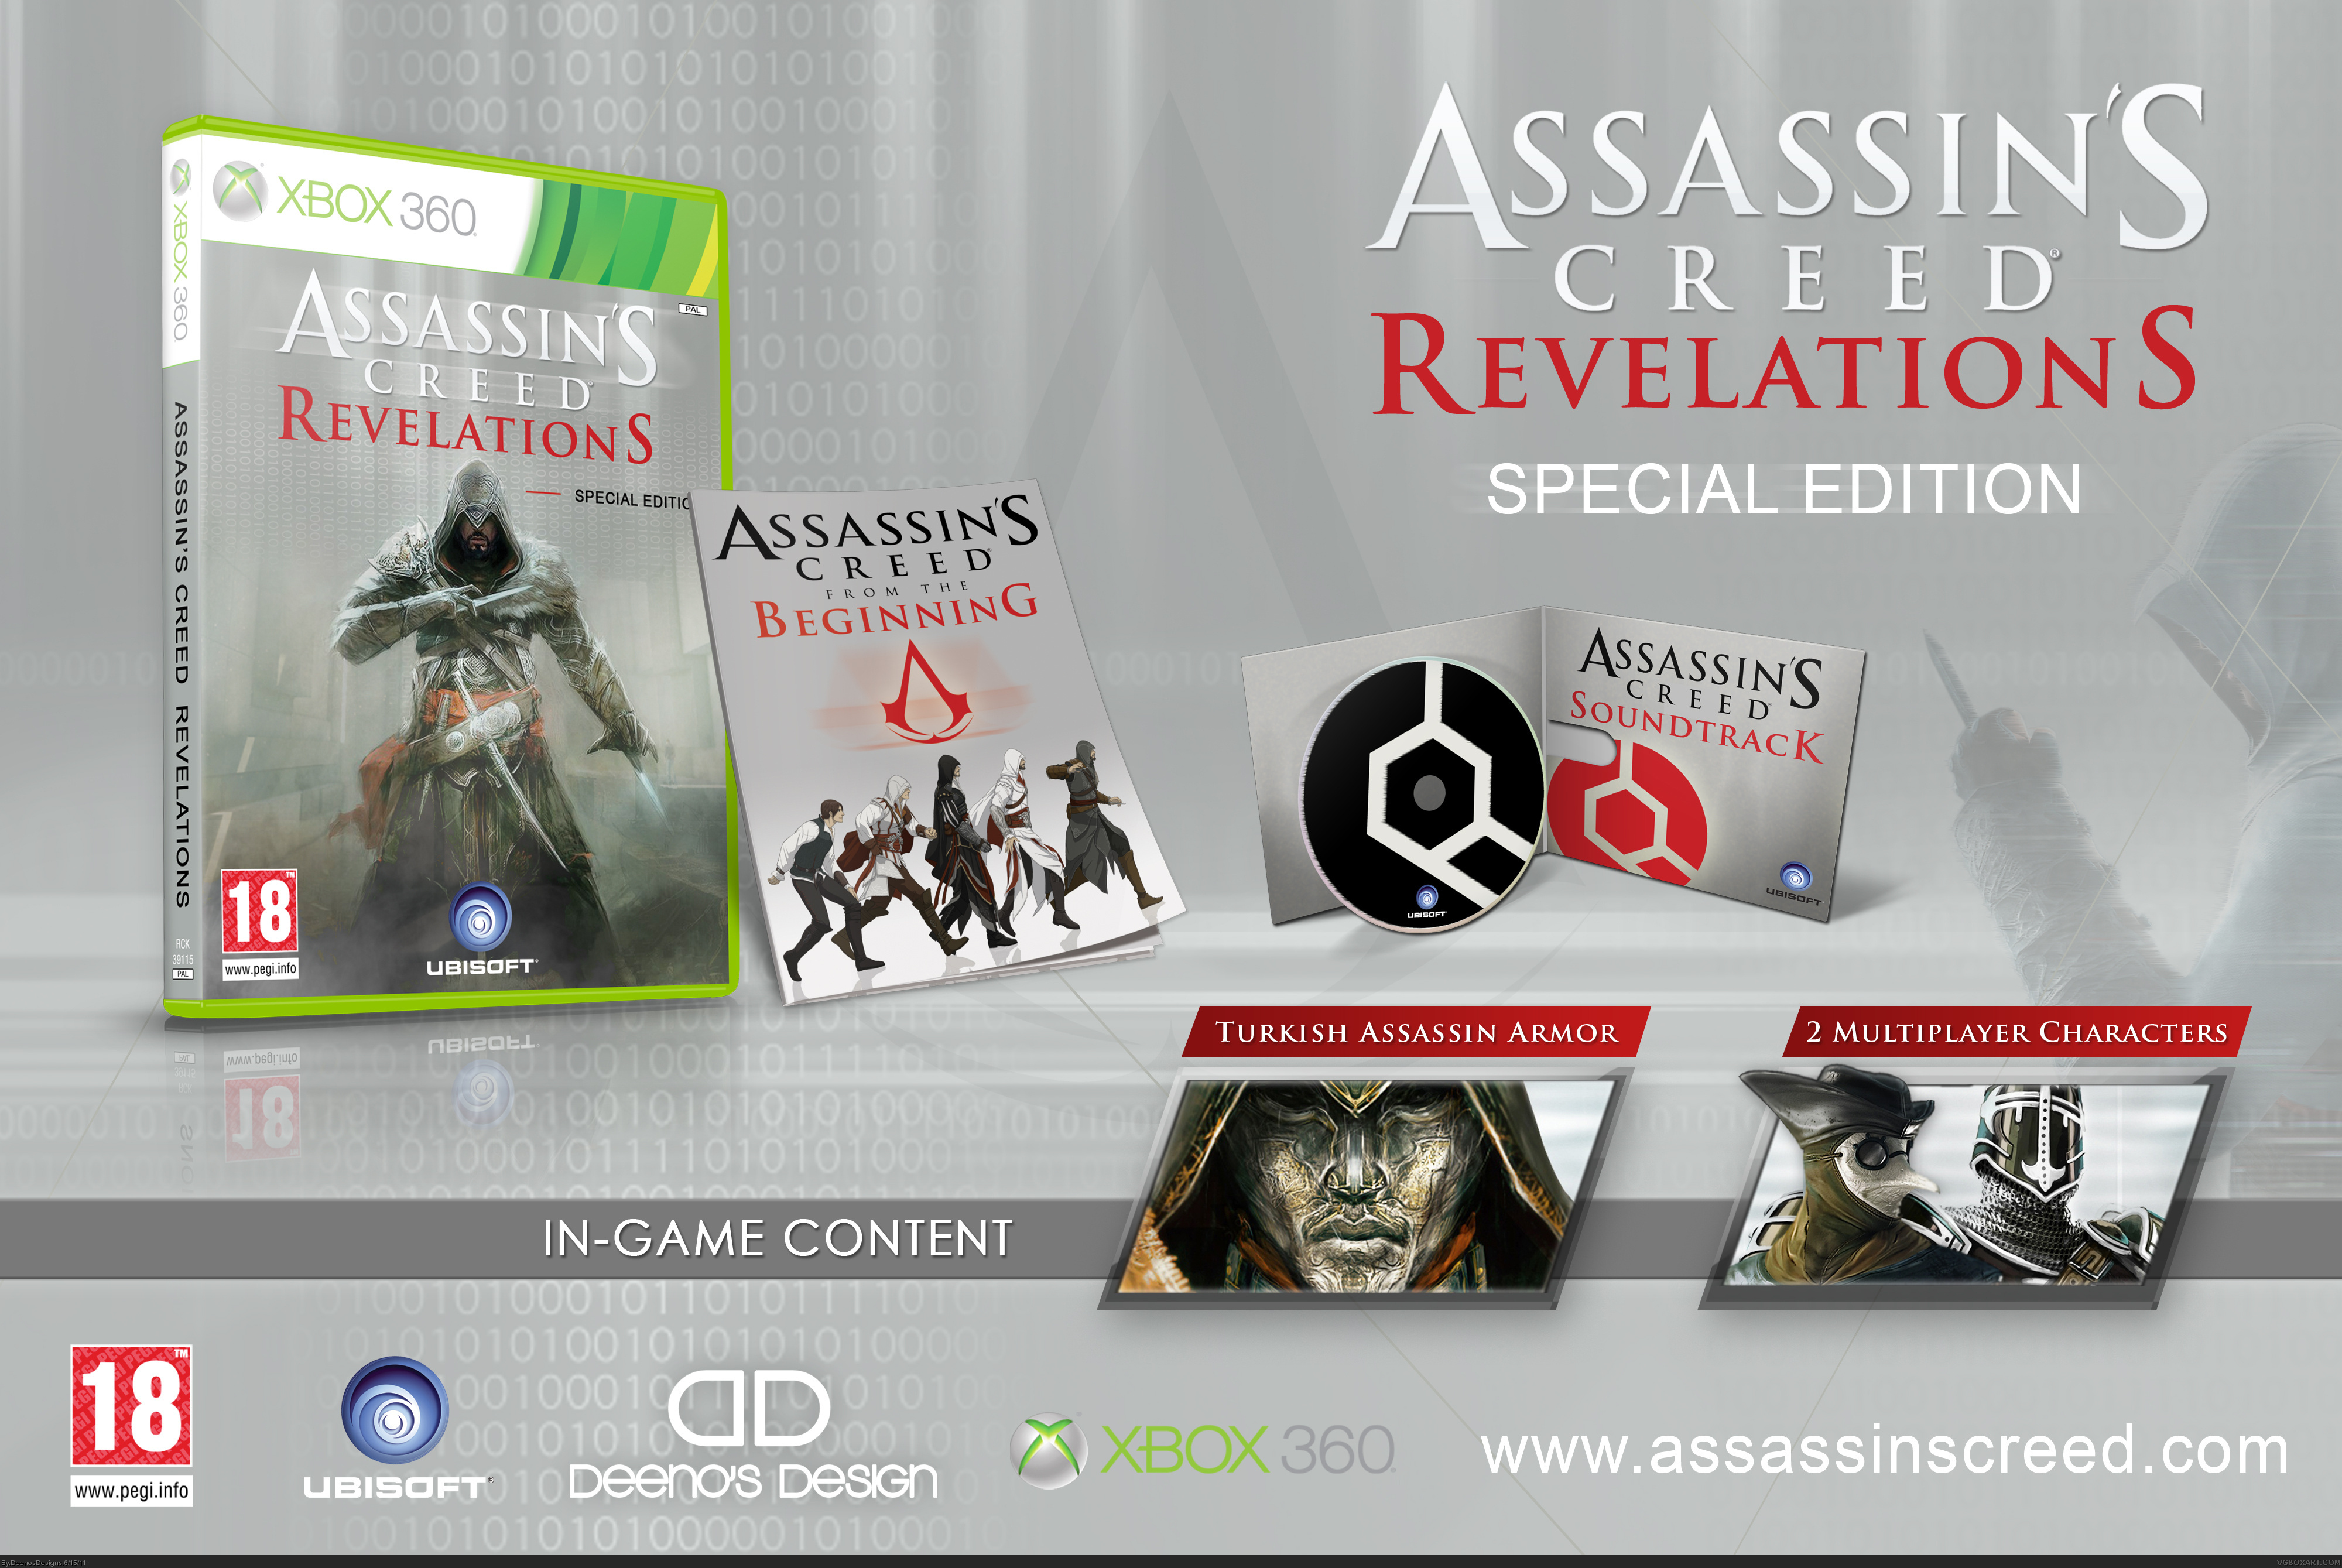 Assassin's Creed Revelations - Special Edition box cover